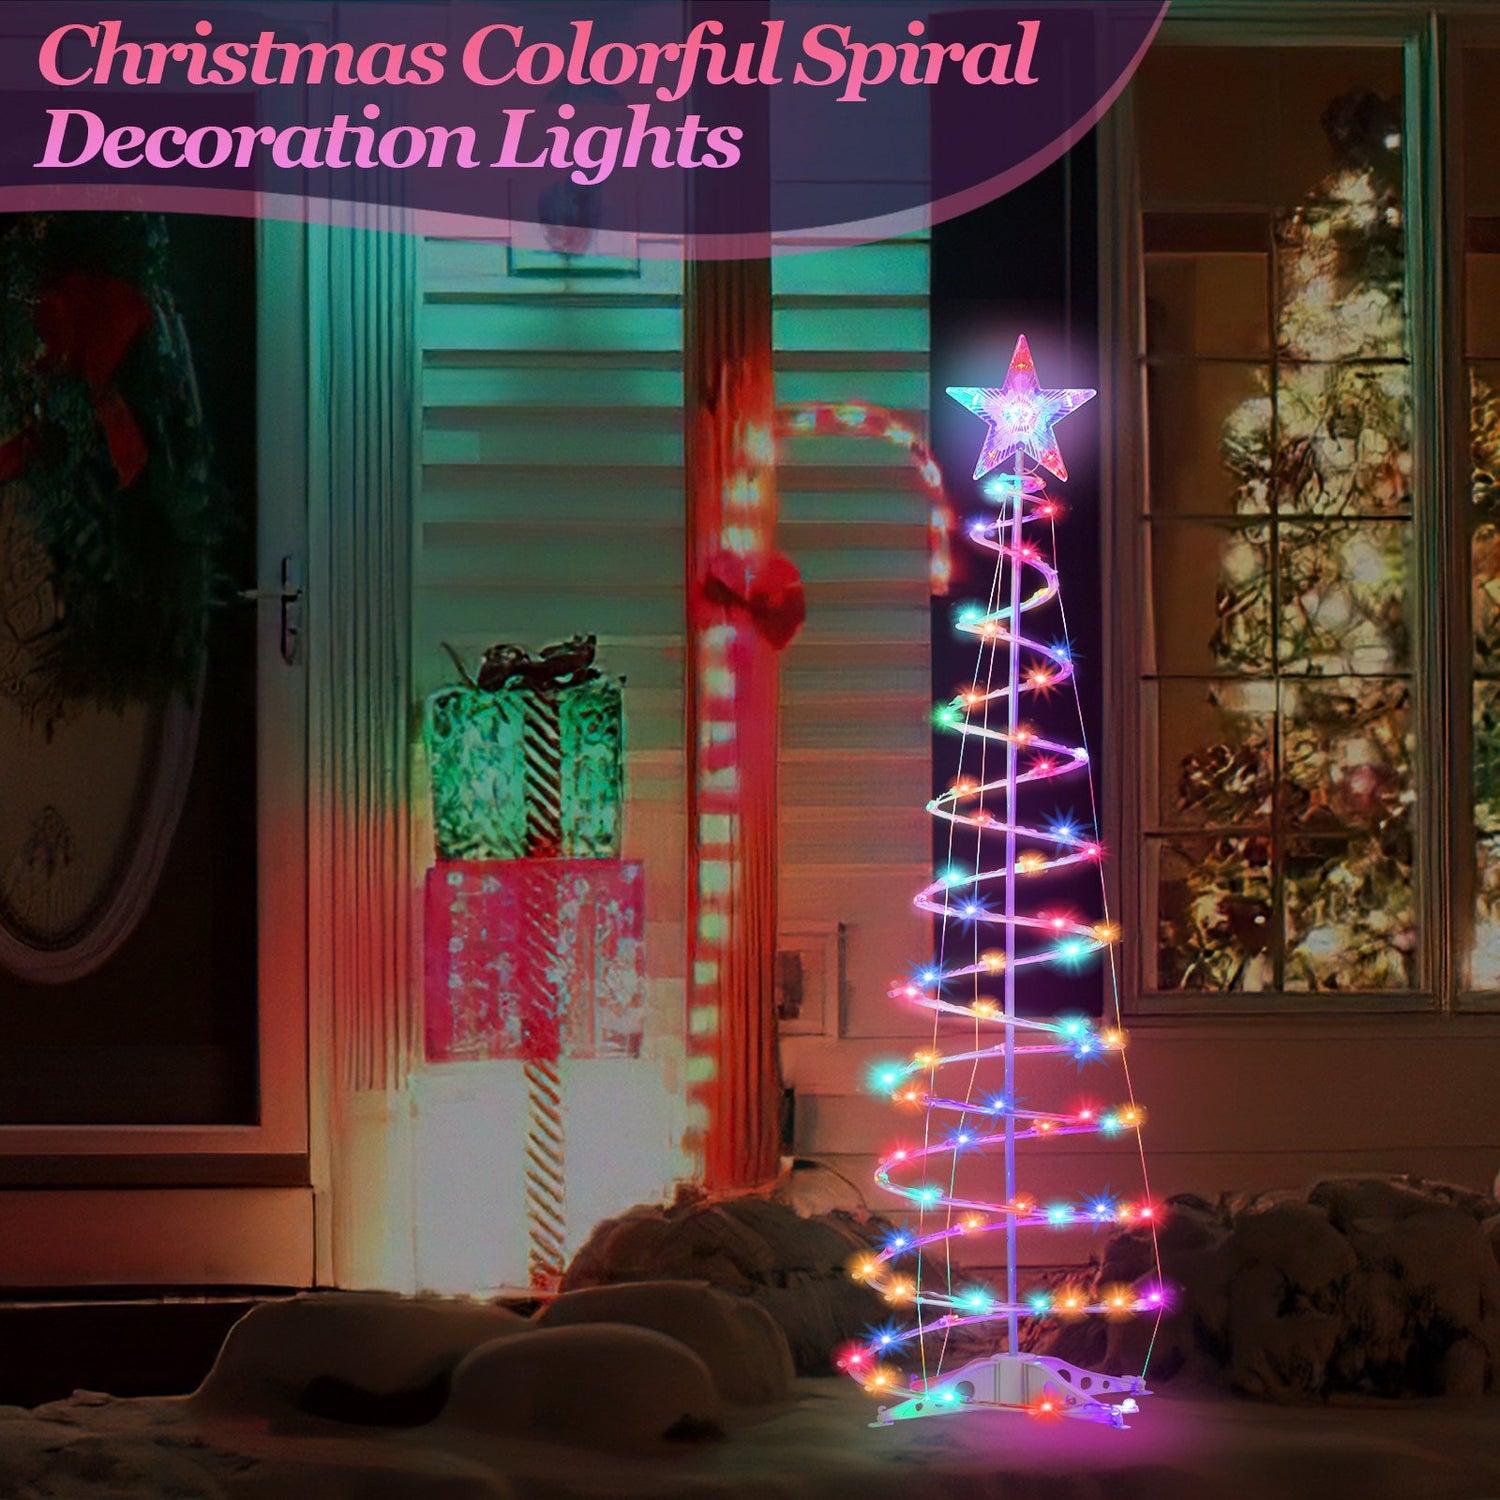 6ft Prelit Christmas Tree - Convenient Remote Control - Easy - 330 LED  Lights